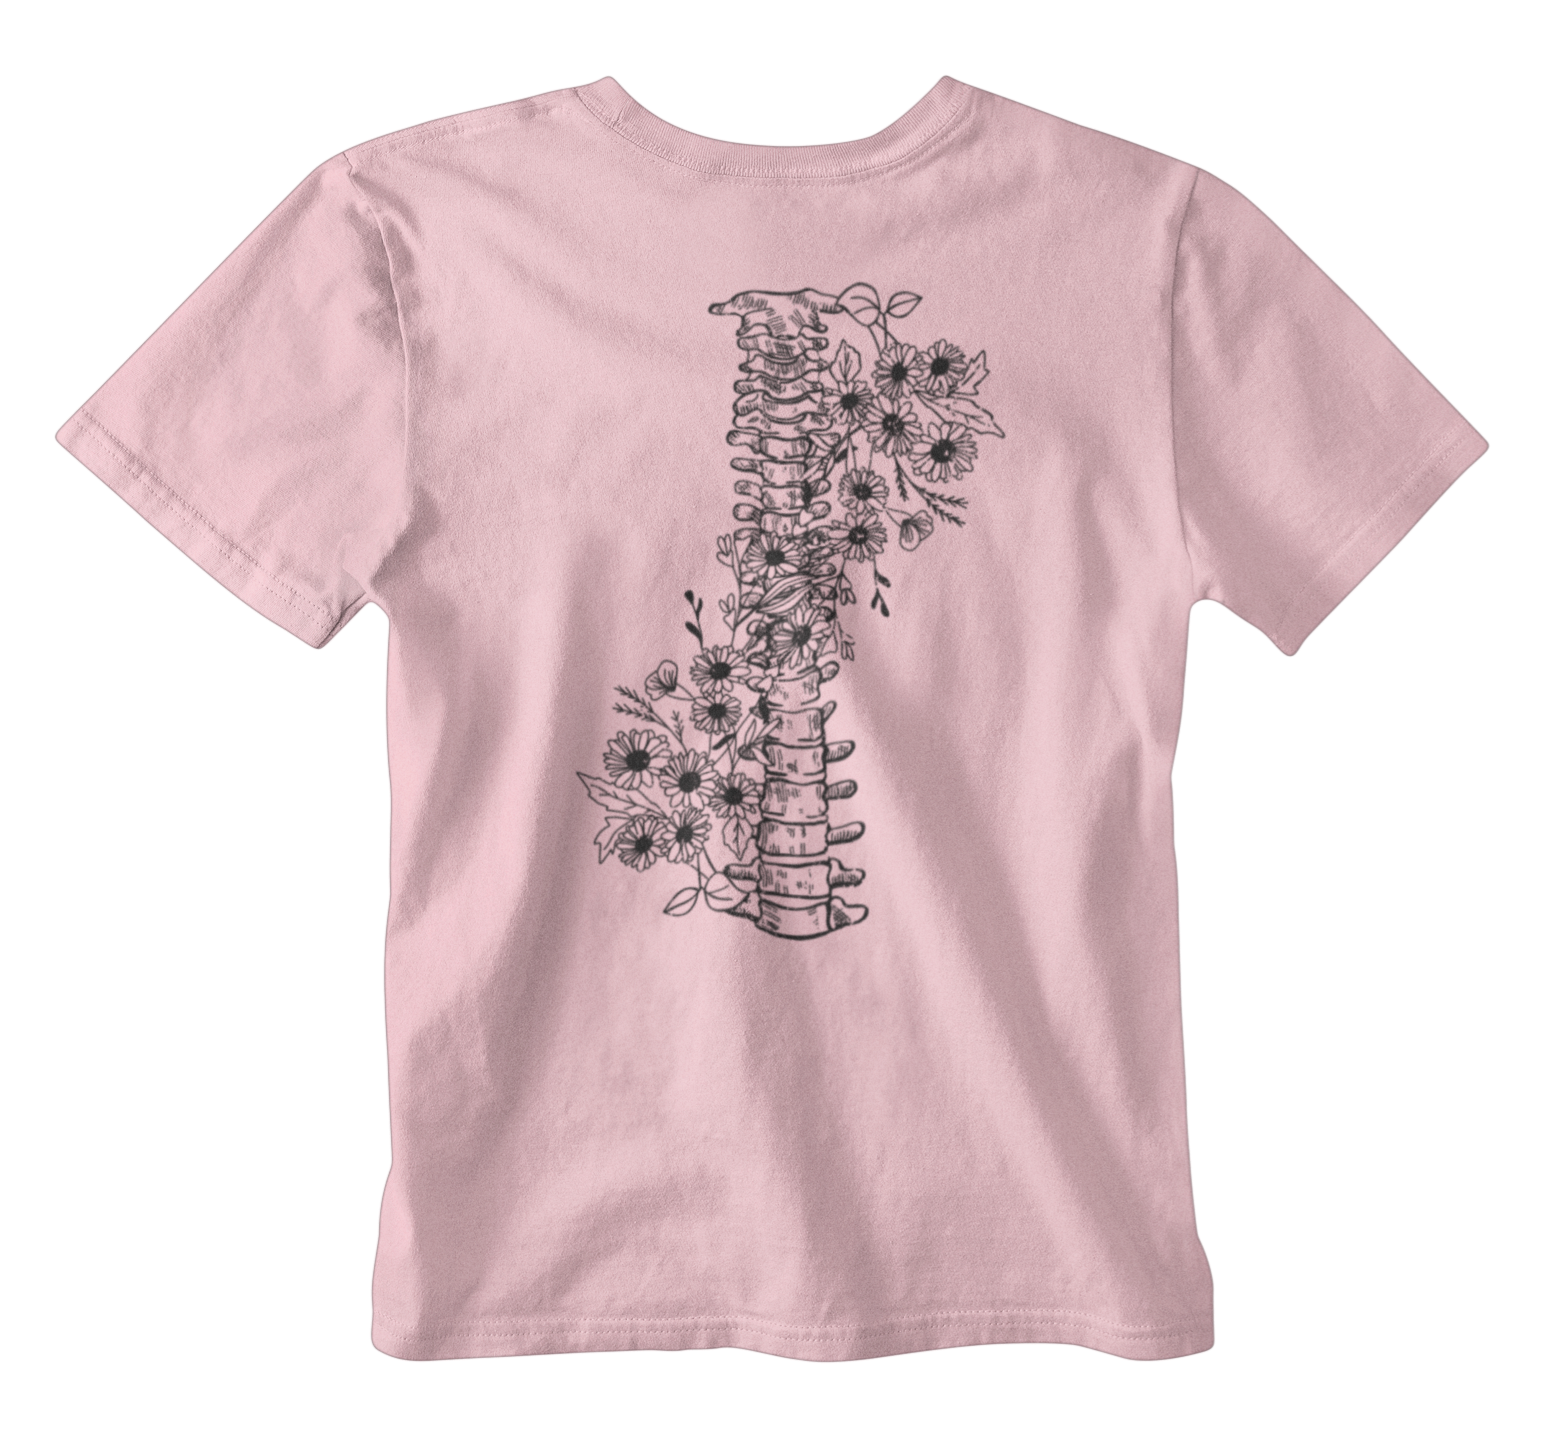 Women's light pink t-shirt with a black graphic going up the back of the shirt of a human spine with flowers entwined, growing through the spine